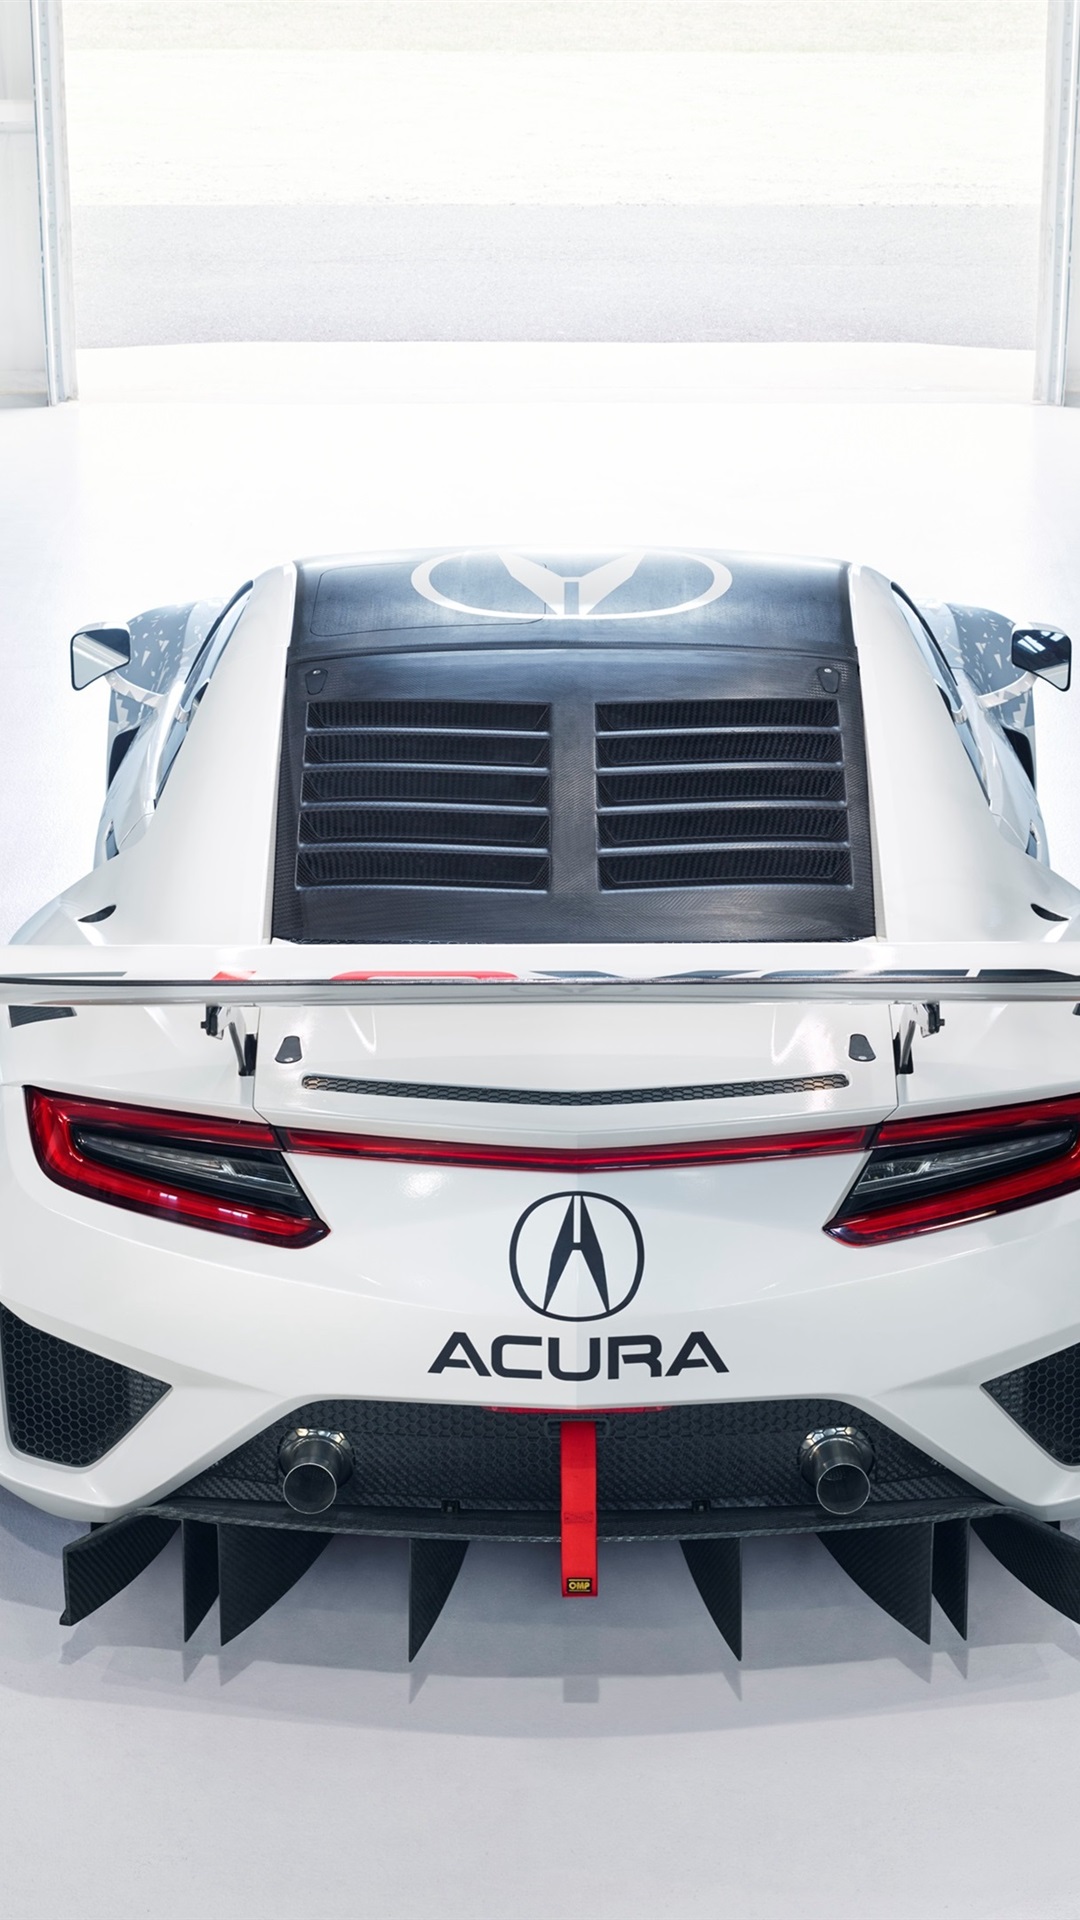 Acura Nsx Gt3 Wallpaper Iphone , HD Wallpaper & Backgrounds